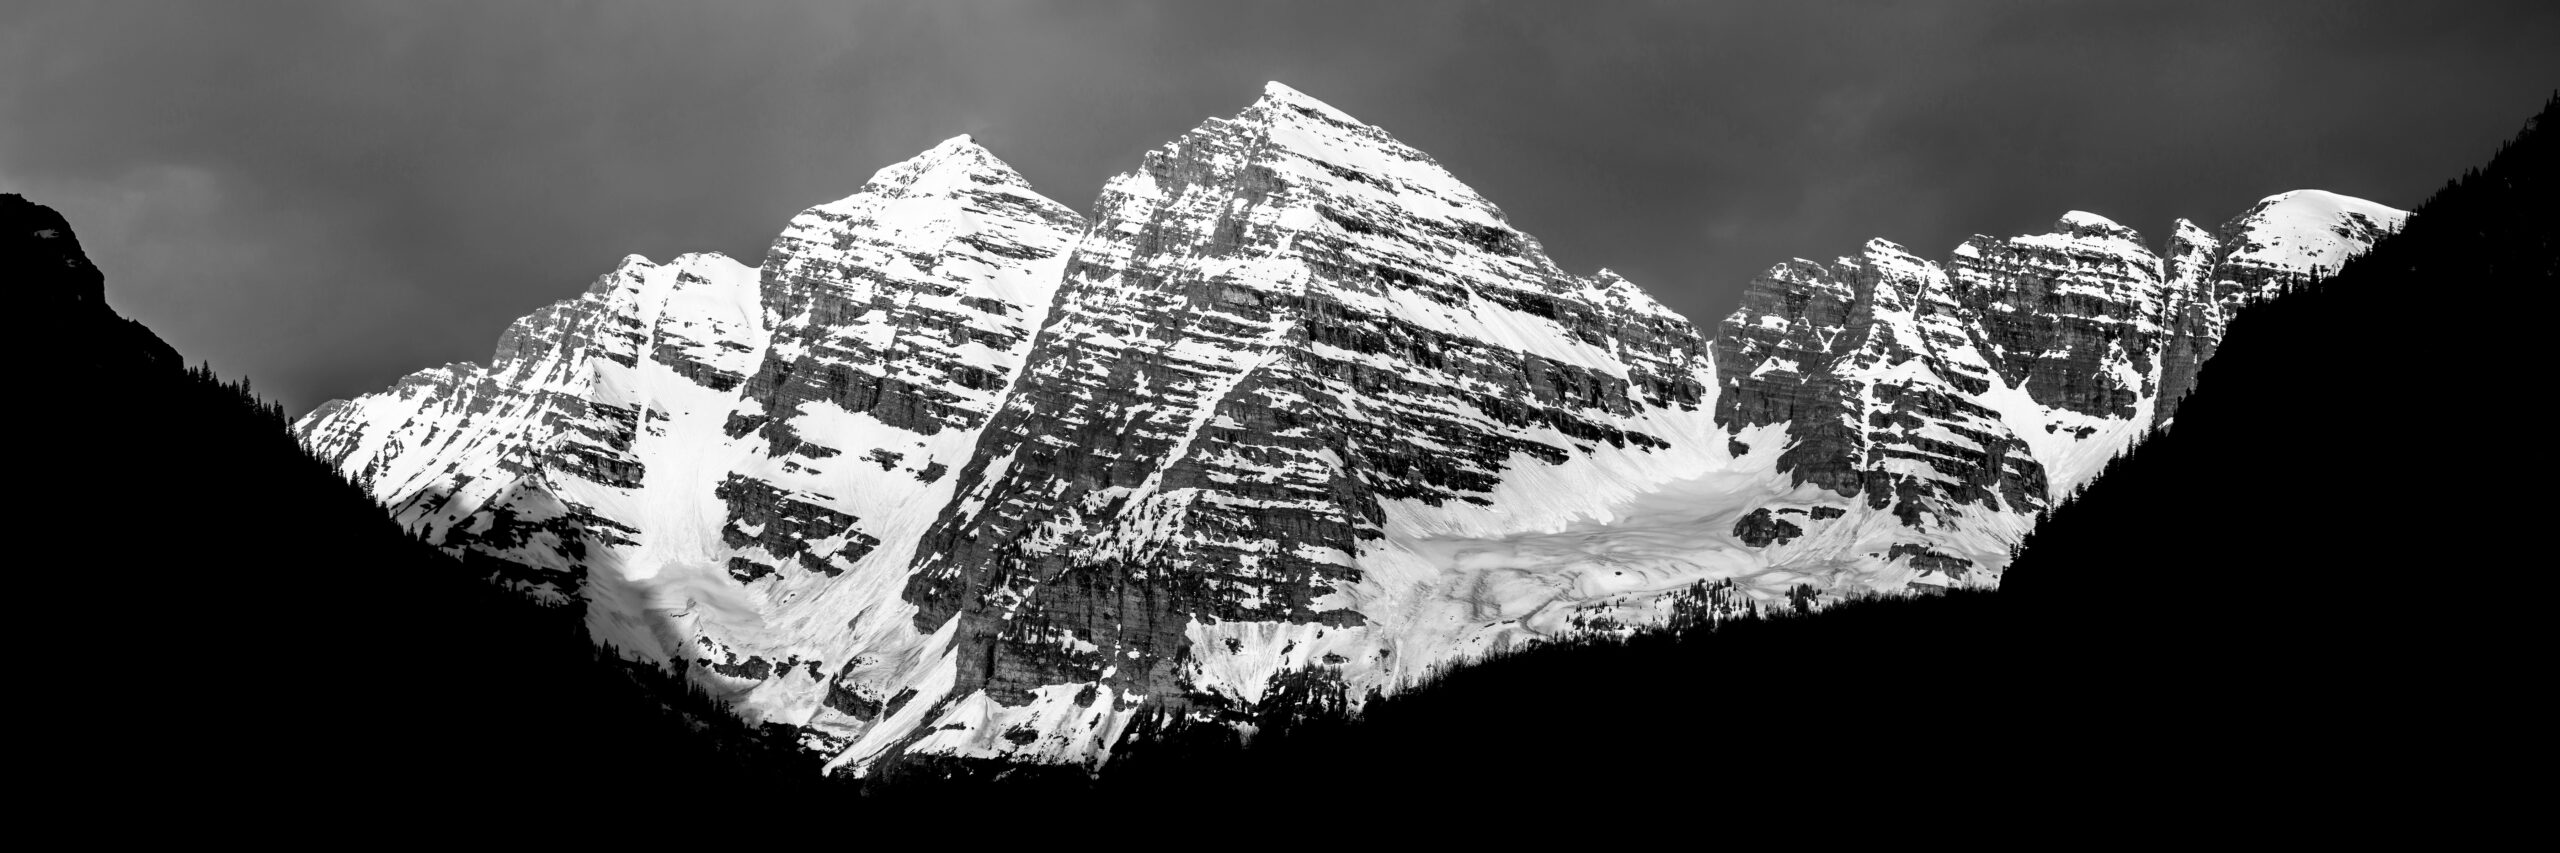 Black and white panoramic image of Maroon Bells, Colorado - Gintchin Fine Art